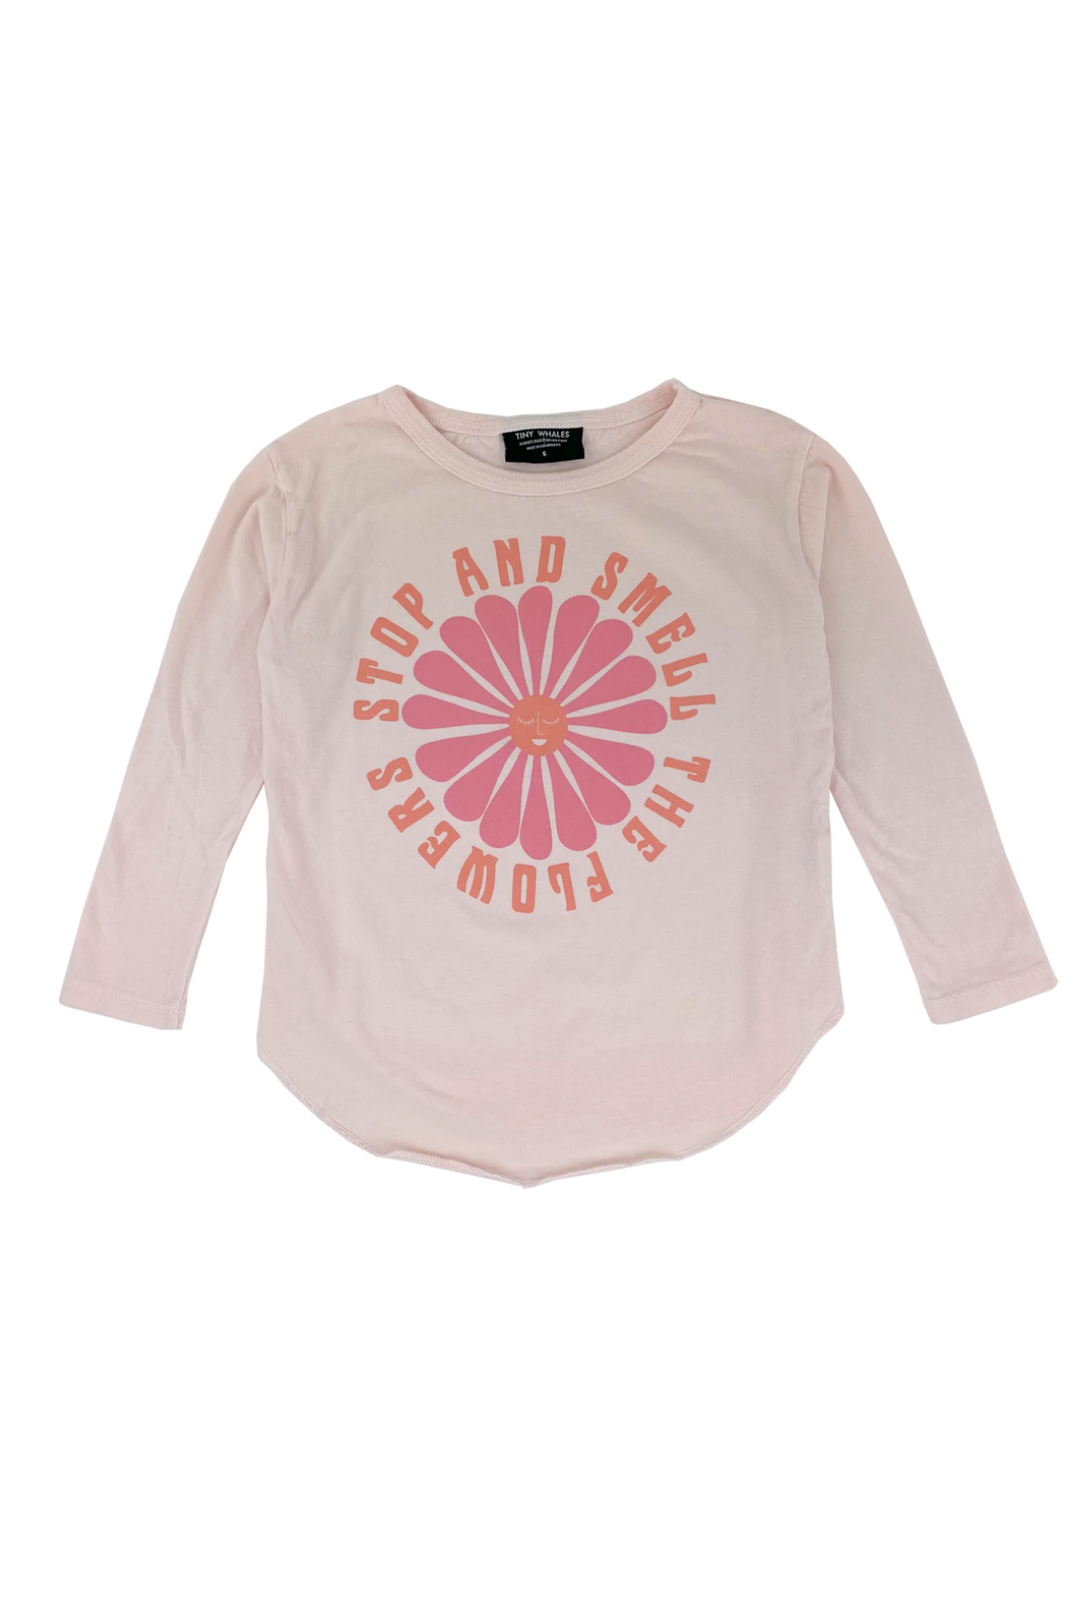 The Smell The Flowers Pink Long Sleeve Graphic Tee by Tiny Whales